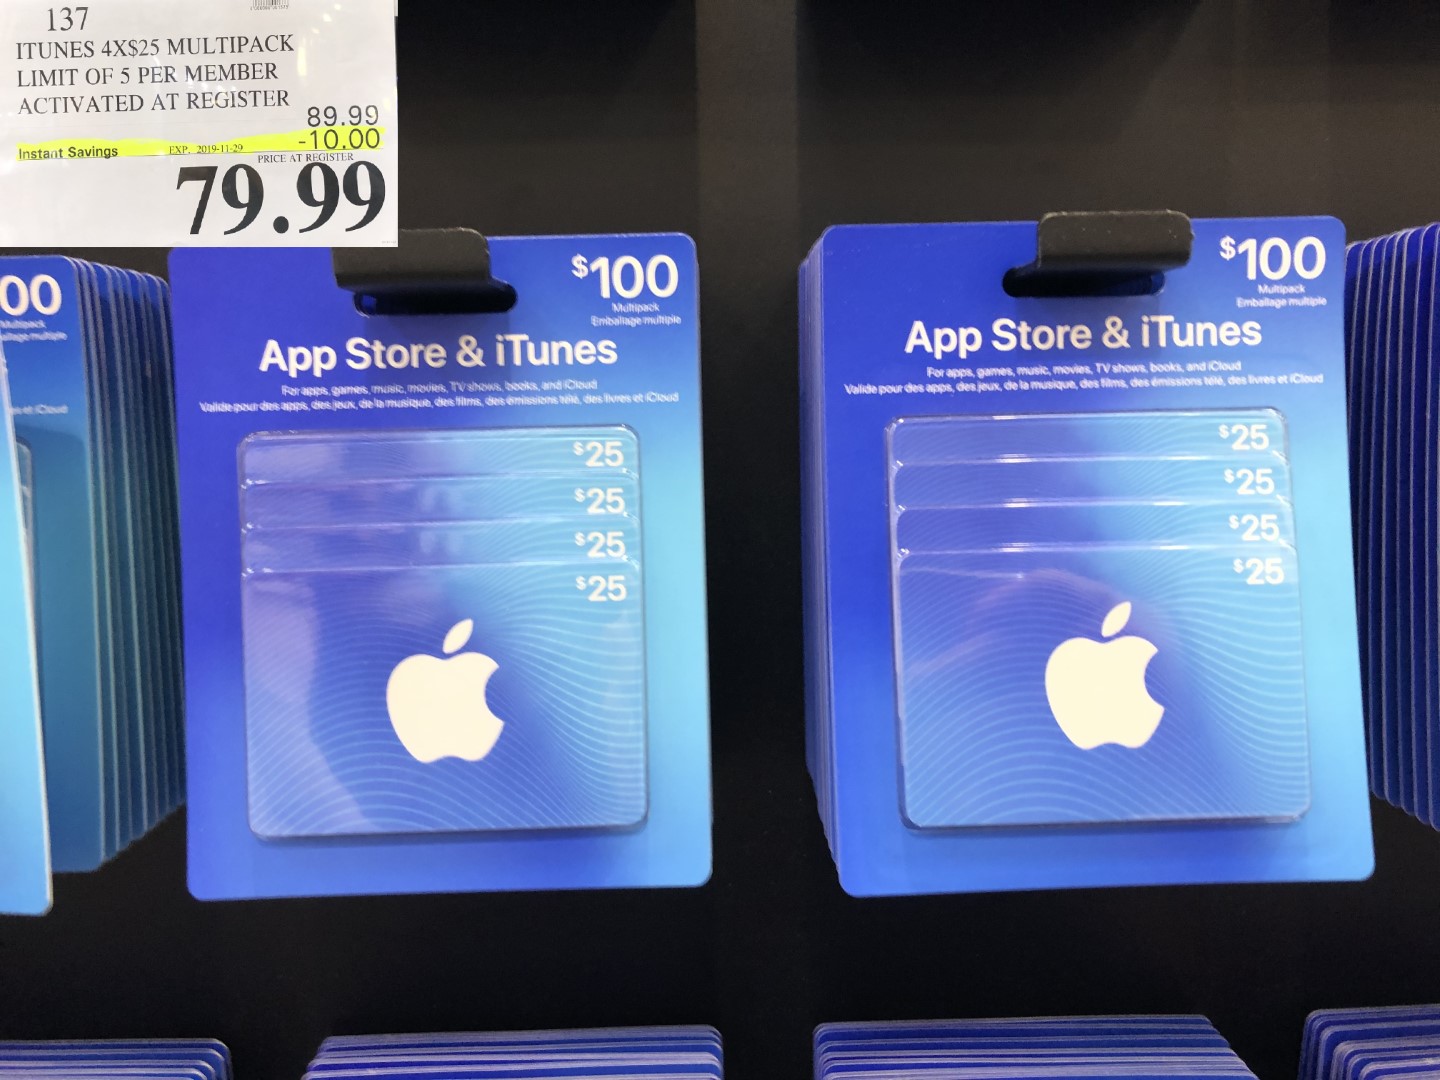 Apple iTunes Cards on Sale for Up to 16% Off at Costco, But Discounts Now  Start with $50 Cards • iPhone in Canada Blog